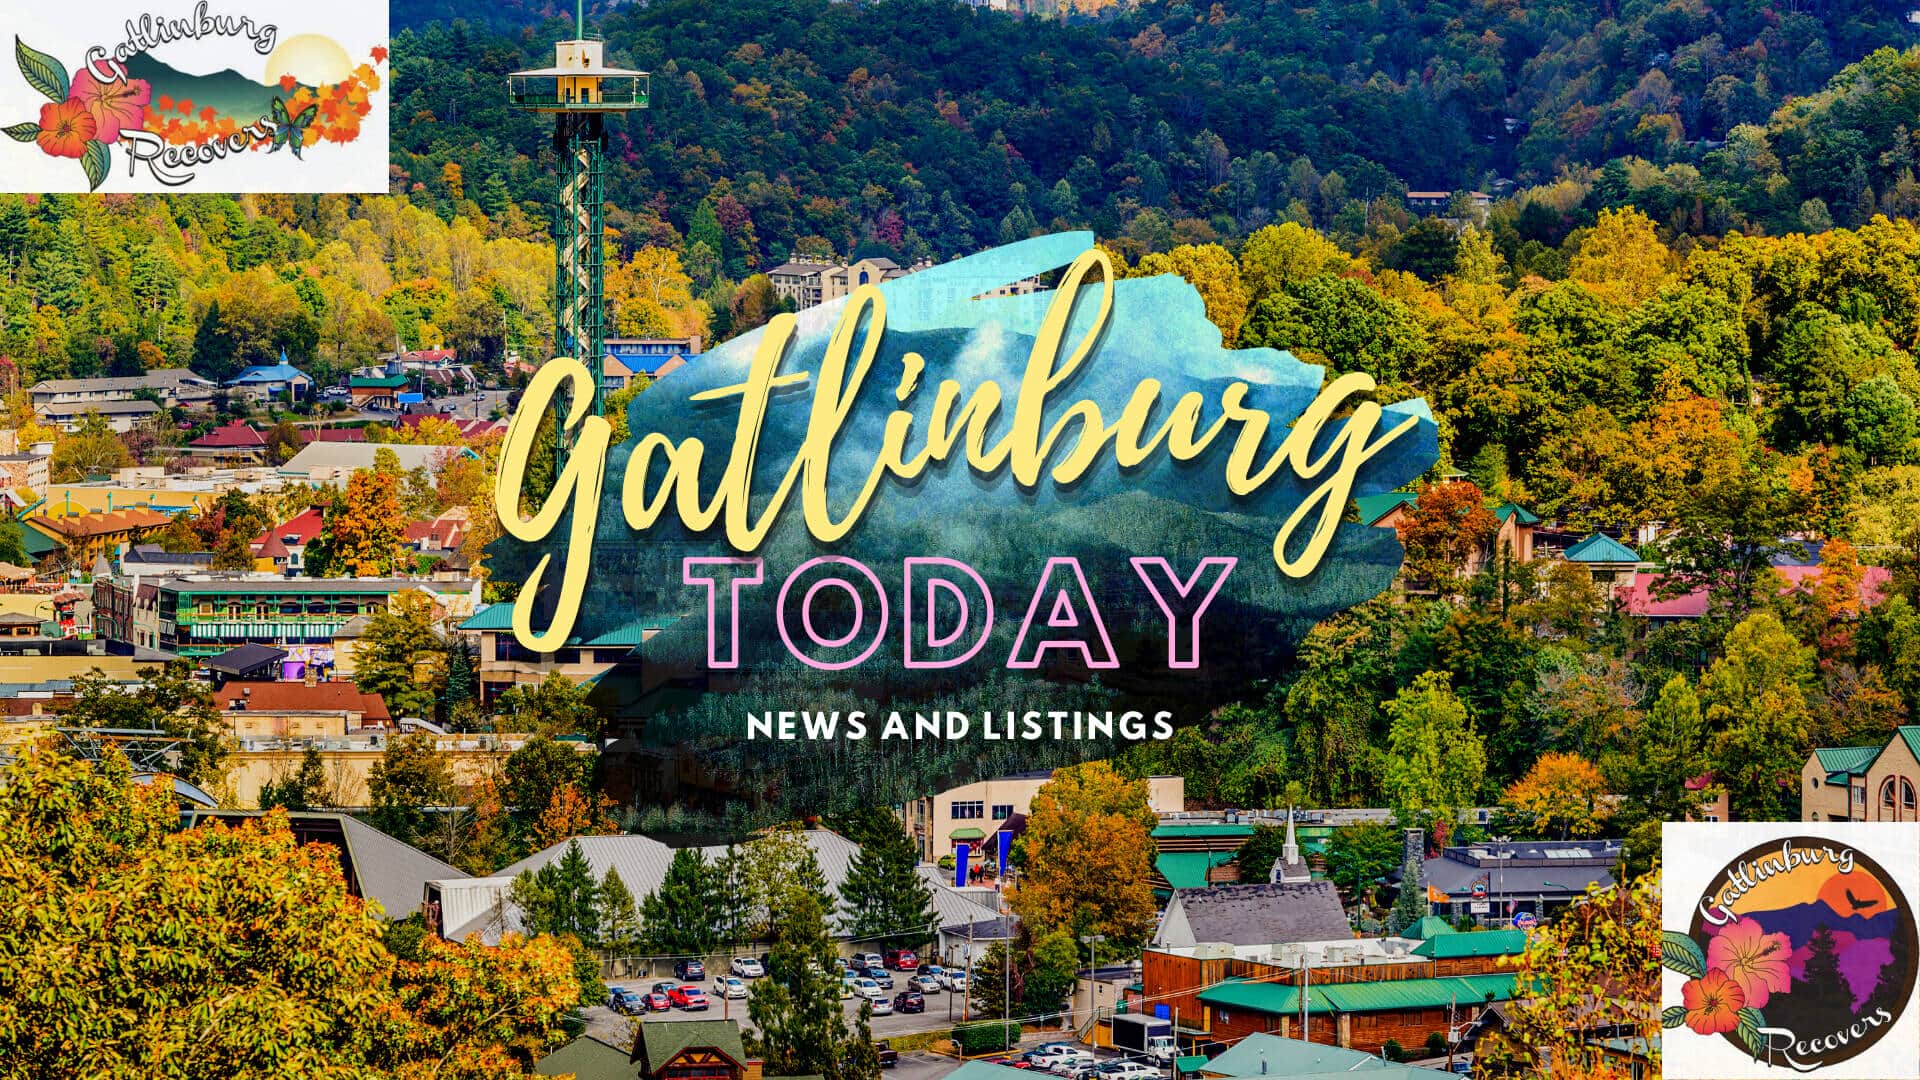 Gatlinburg Today | Gatlinburg Tennessee Vacation Ideas and Connections